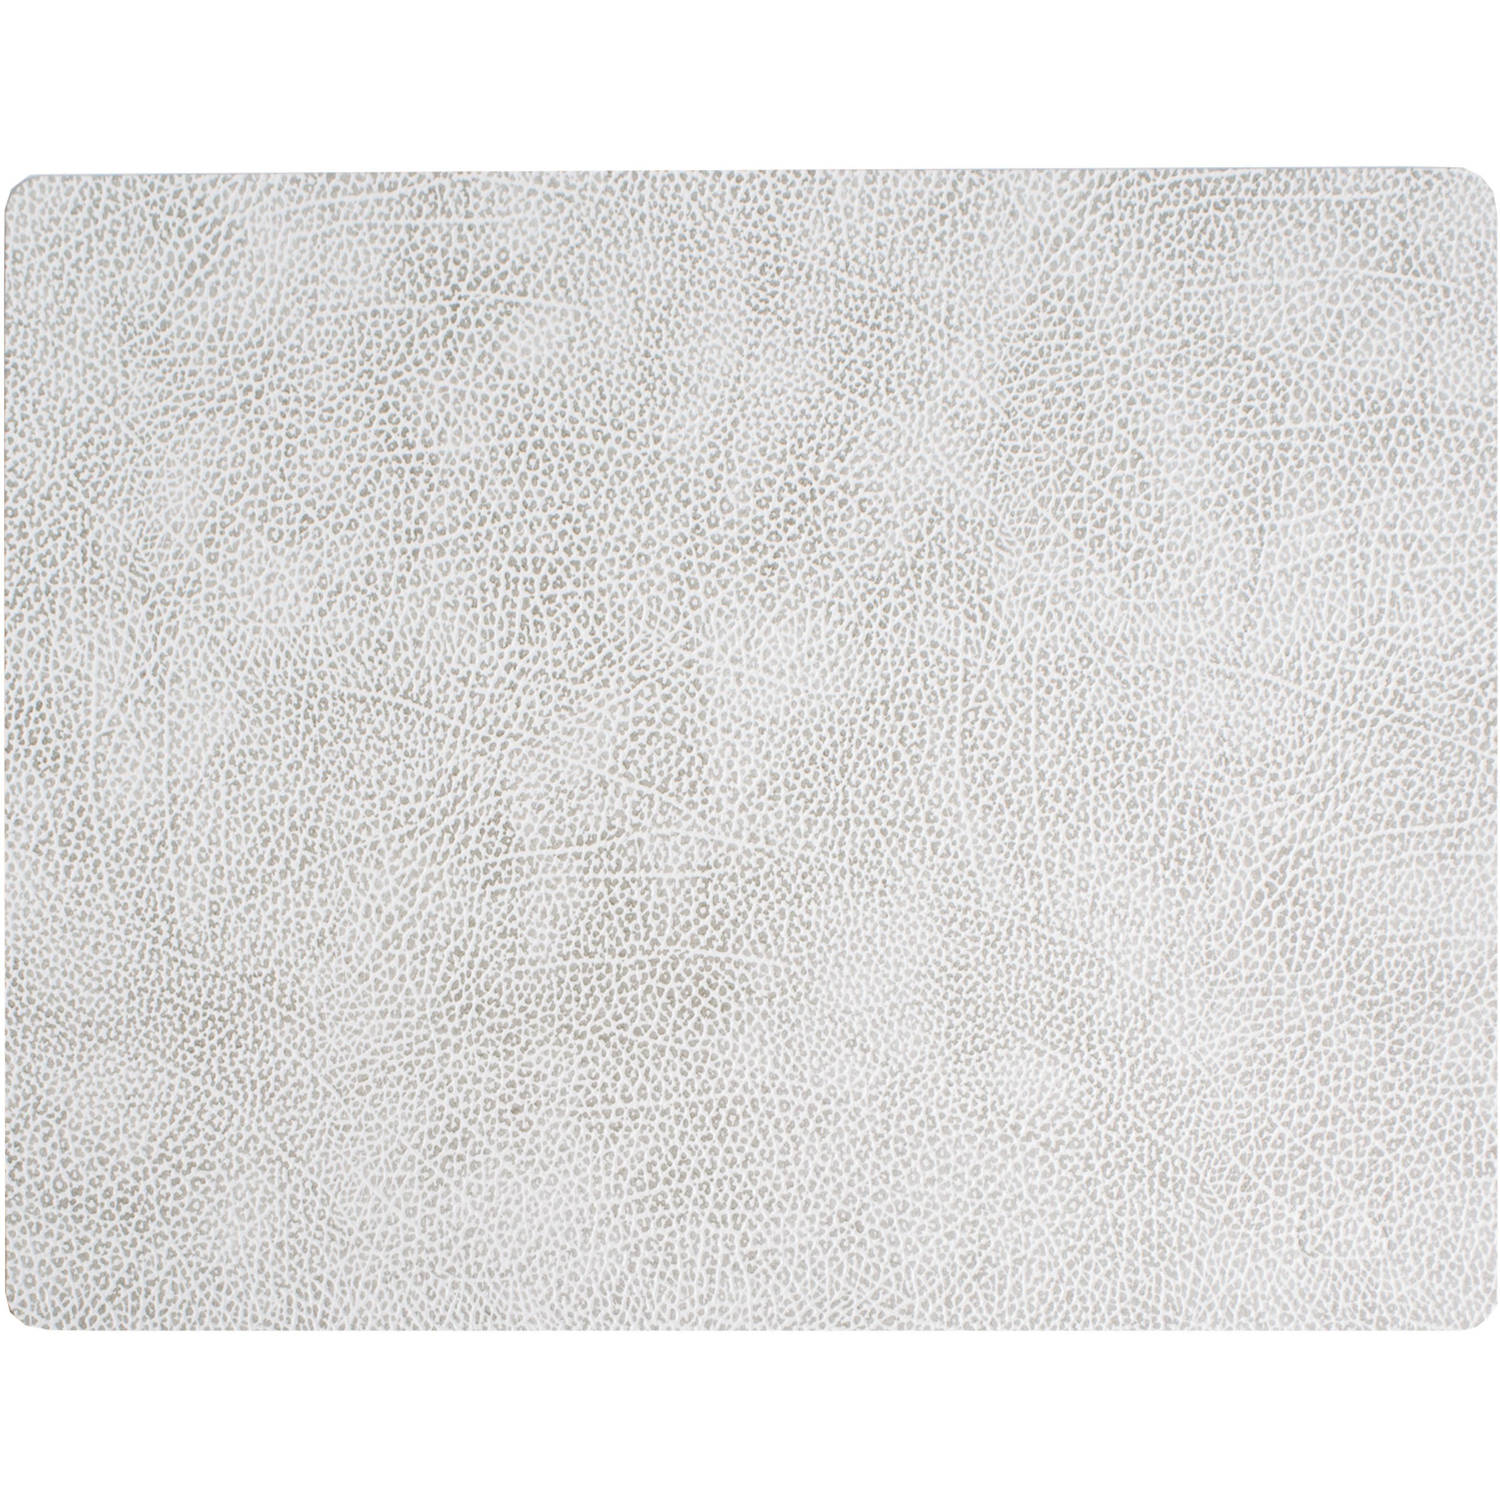 LIND DNA Placemat Hippo - Leer - White Grey - 45 x 35 cm